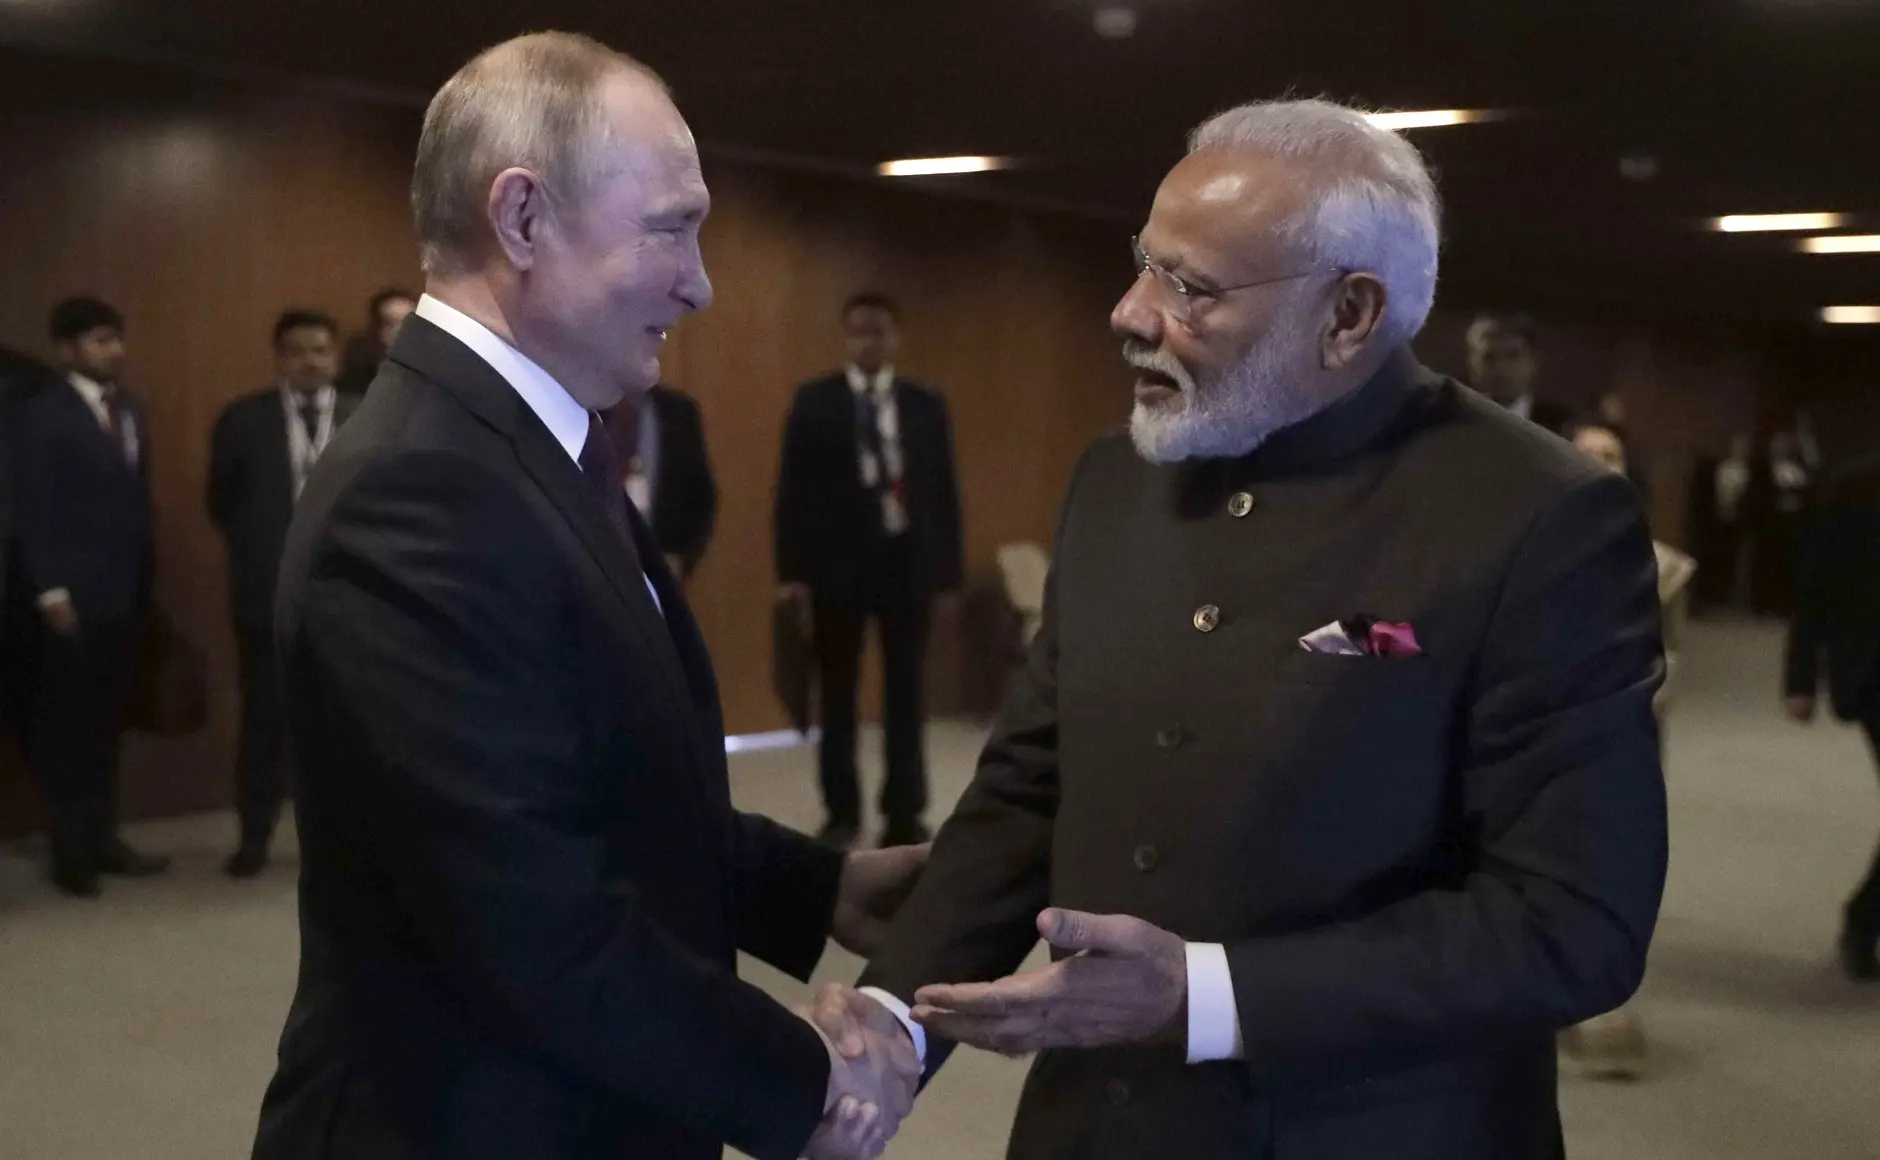 Russia says partnership with India has increased by ‘orders of magnitude’